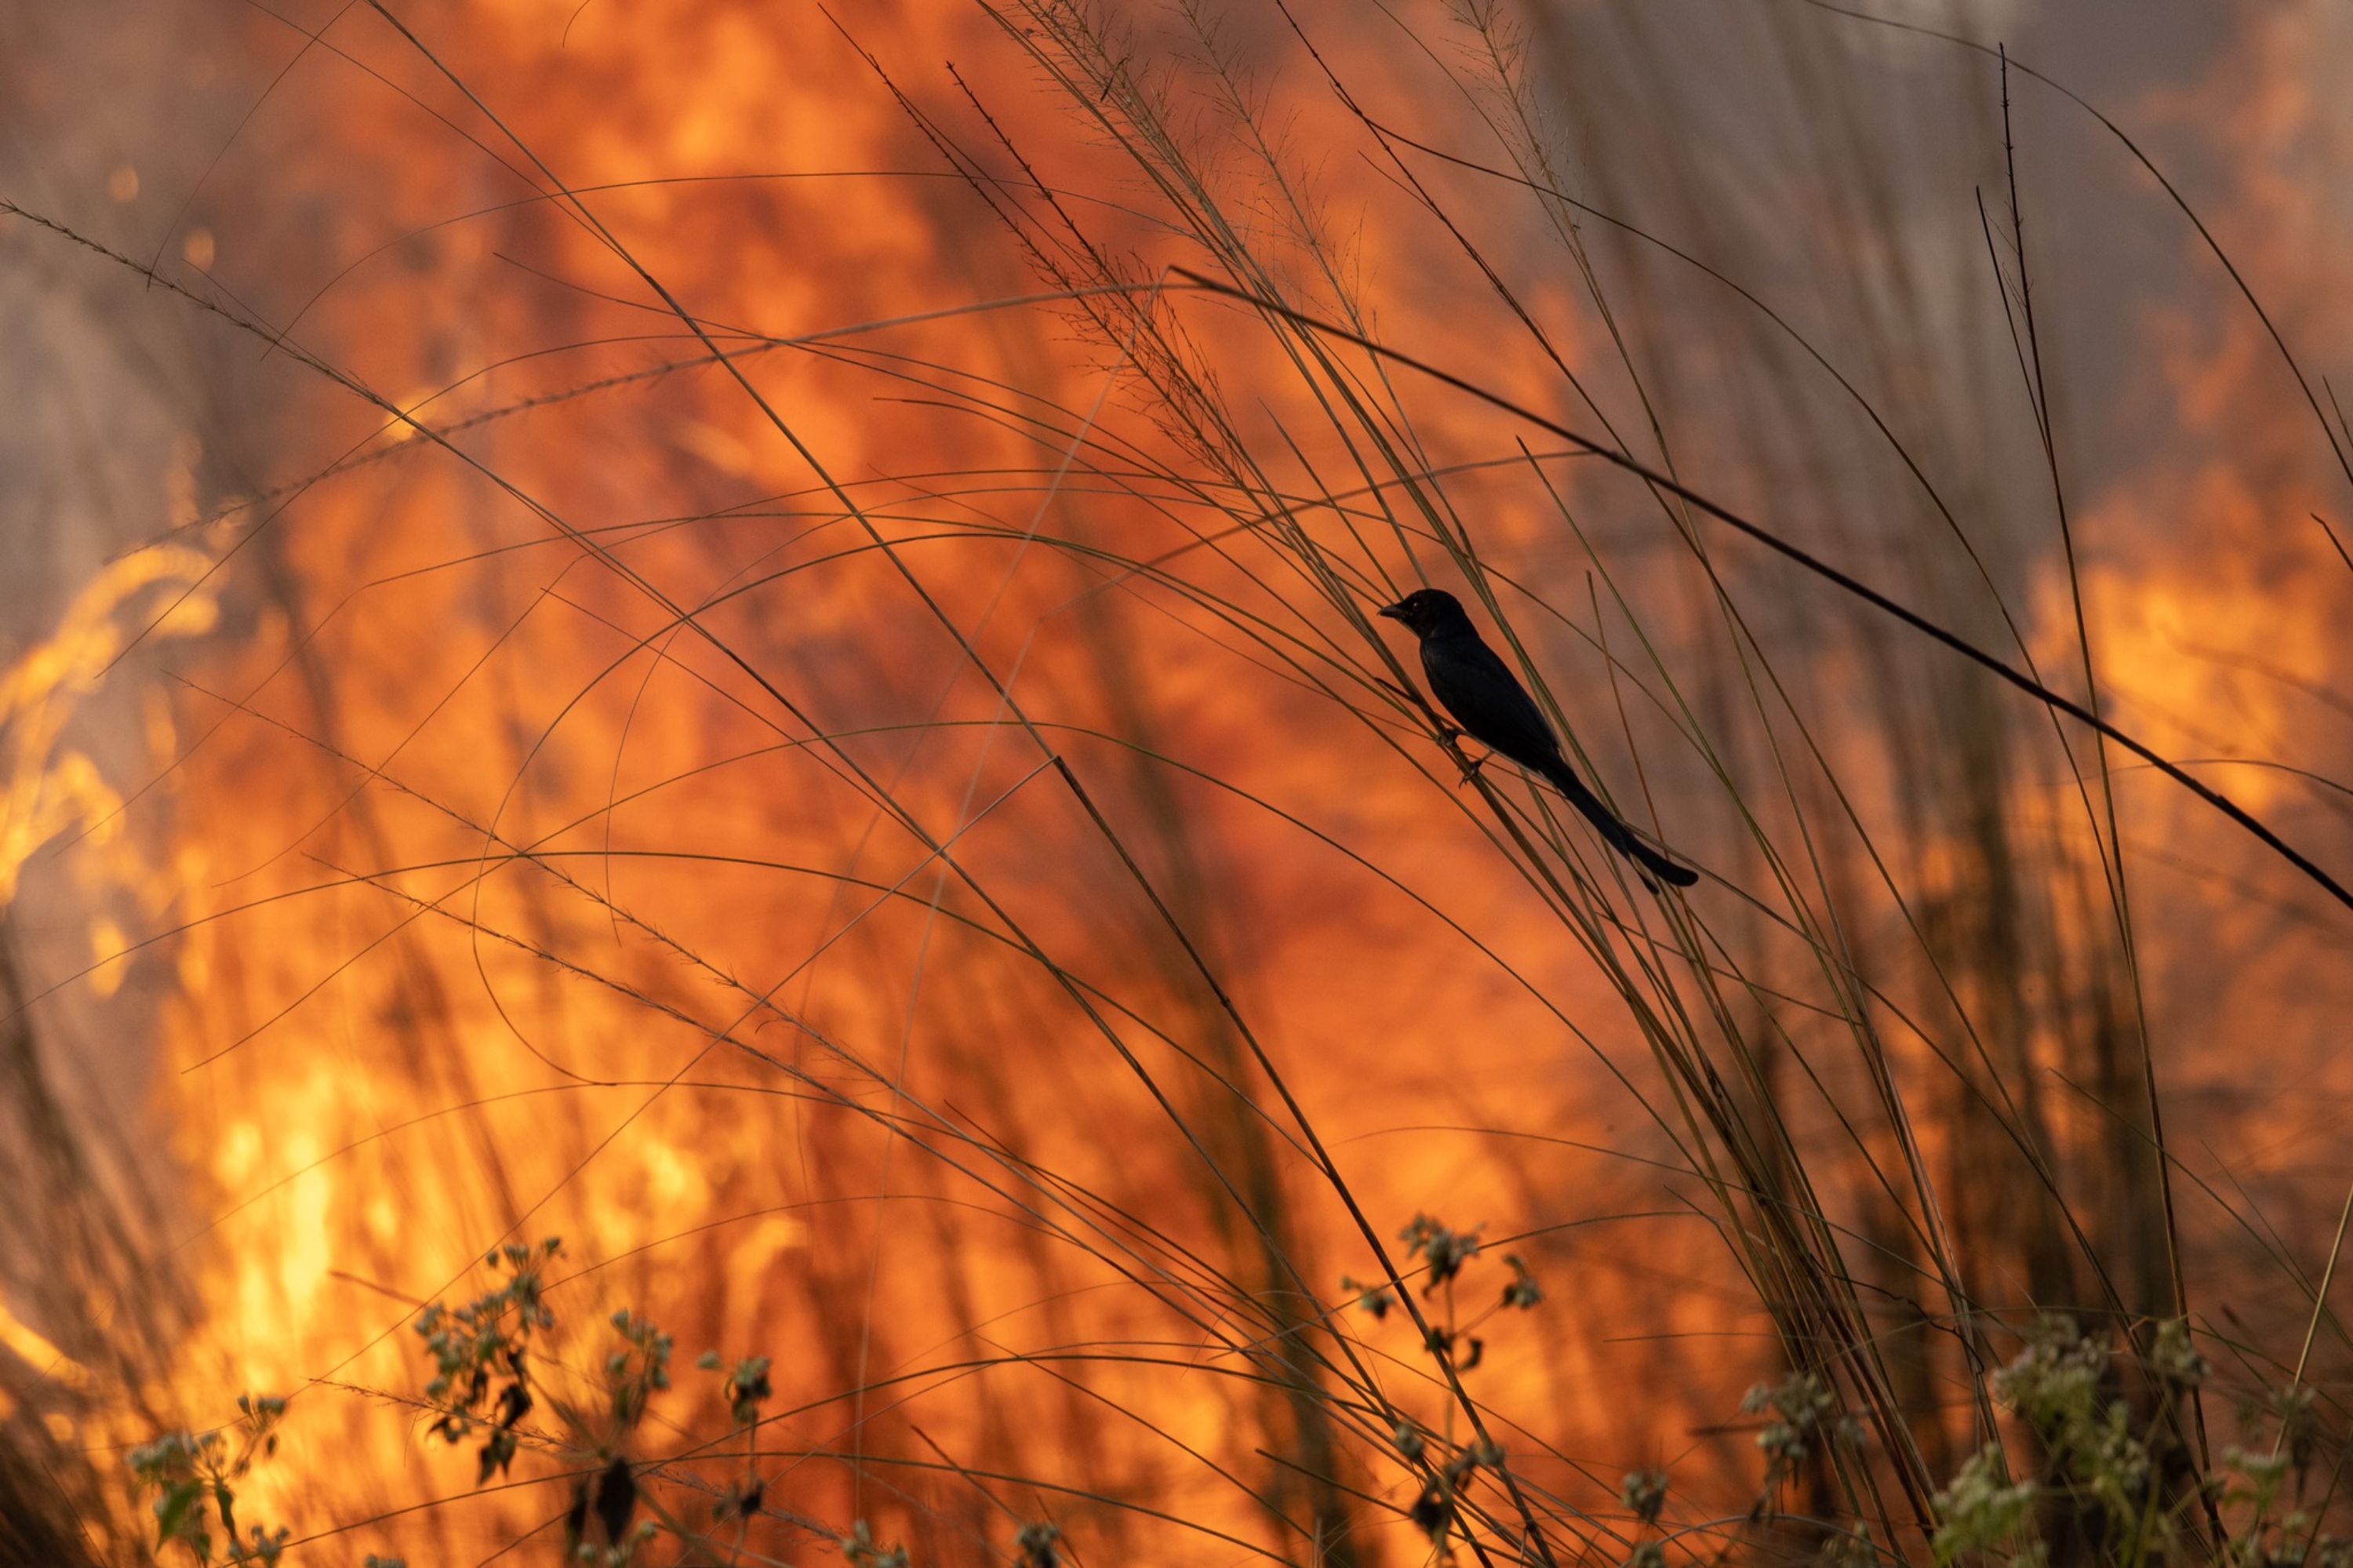 bird sitting on stem of plant in foreground with fire in background